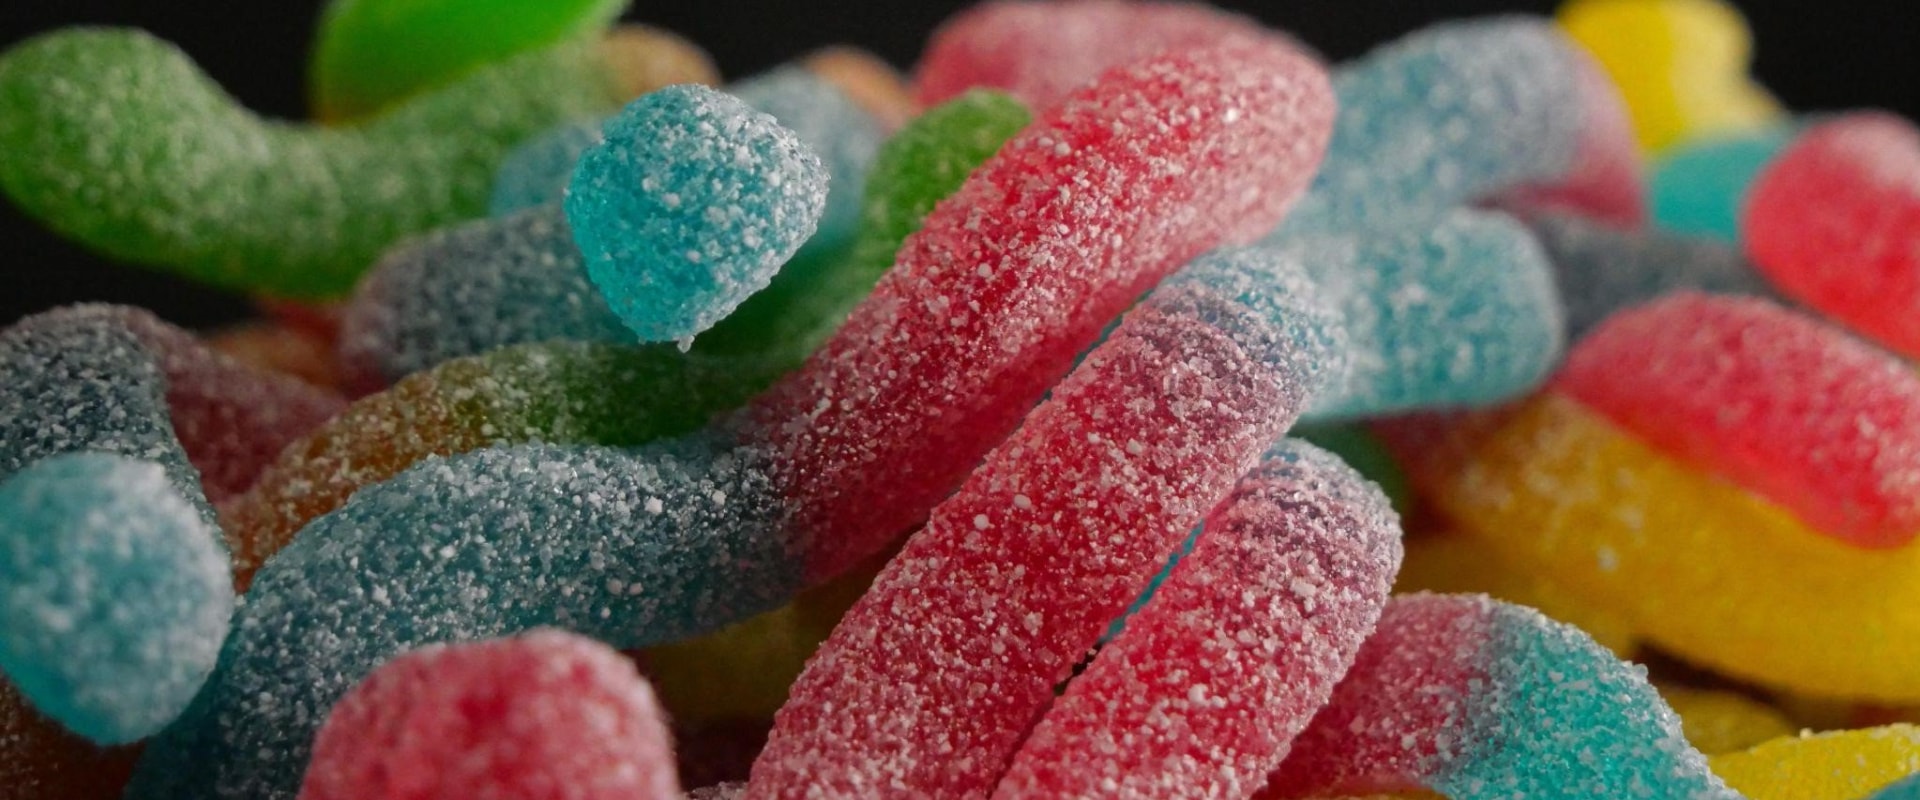 Are delta 9 gummies safe to consume?